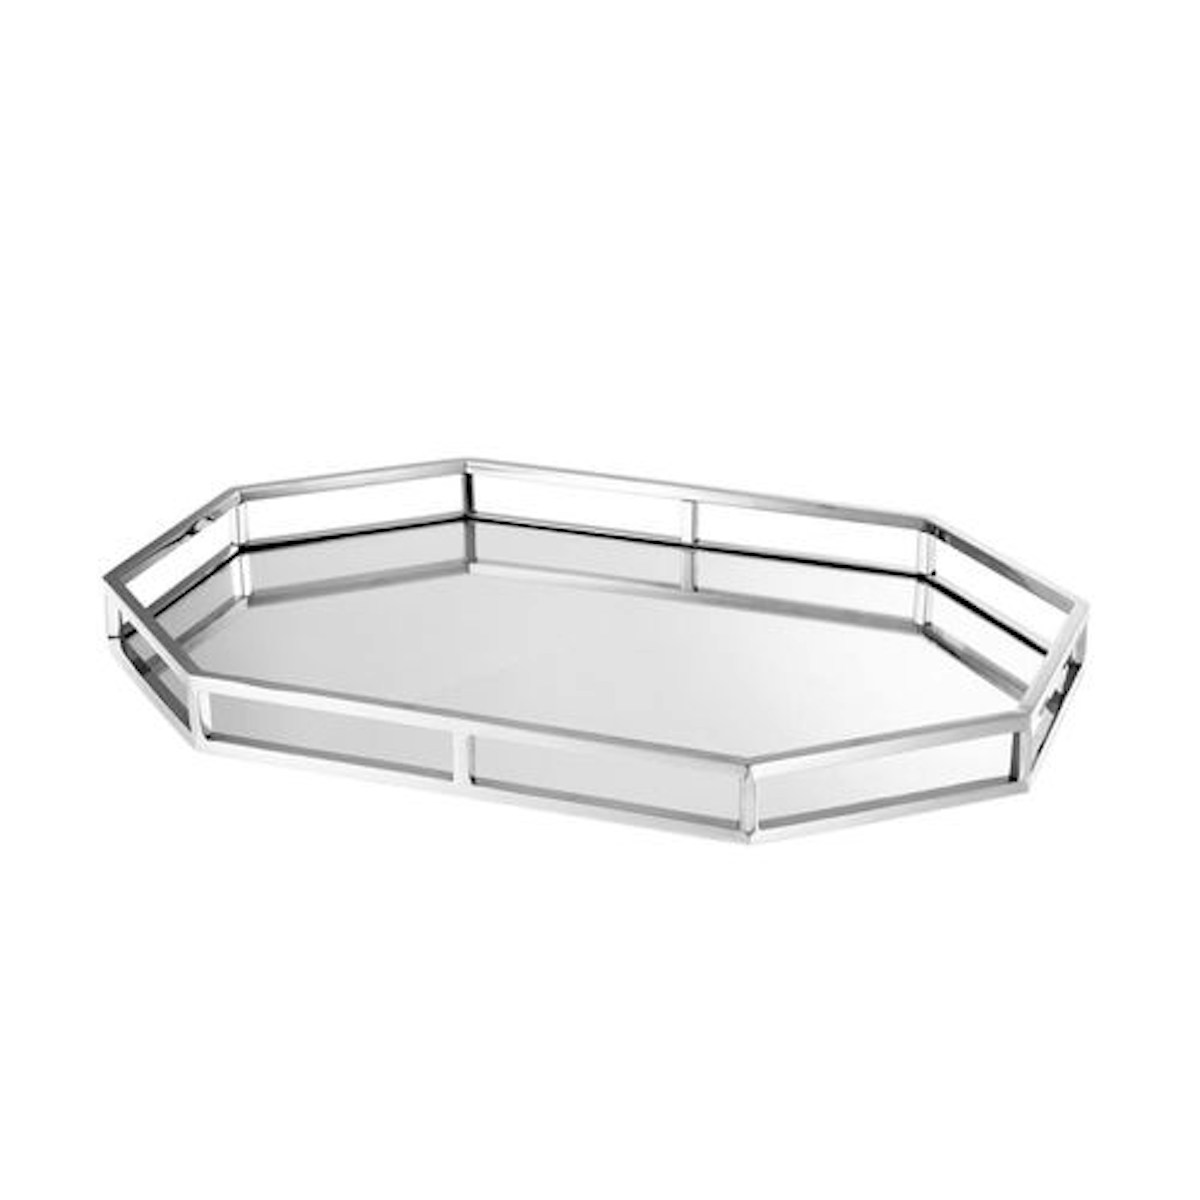 Pelagos Tray - 21 Best Decorative Trays To Buy For Your Tabletop - LuxDeco.com